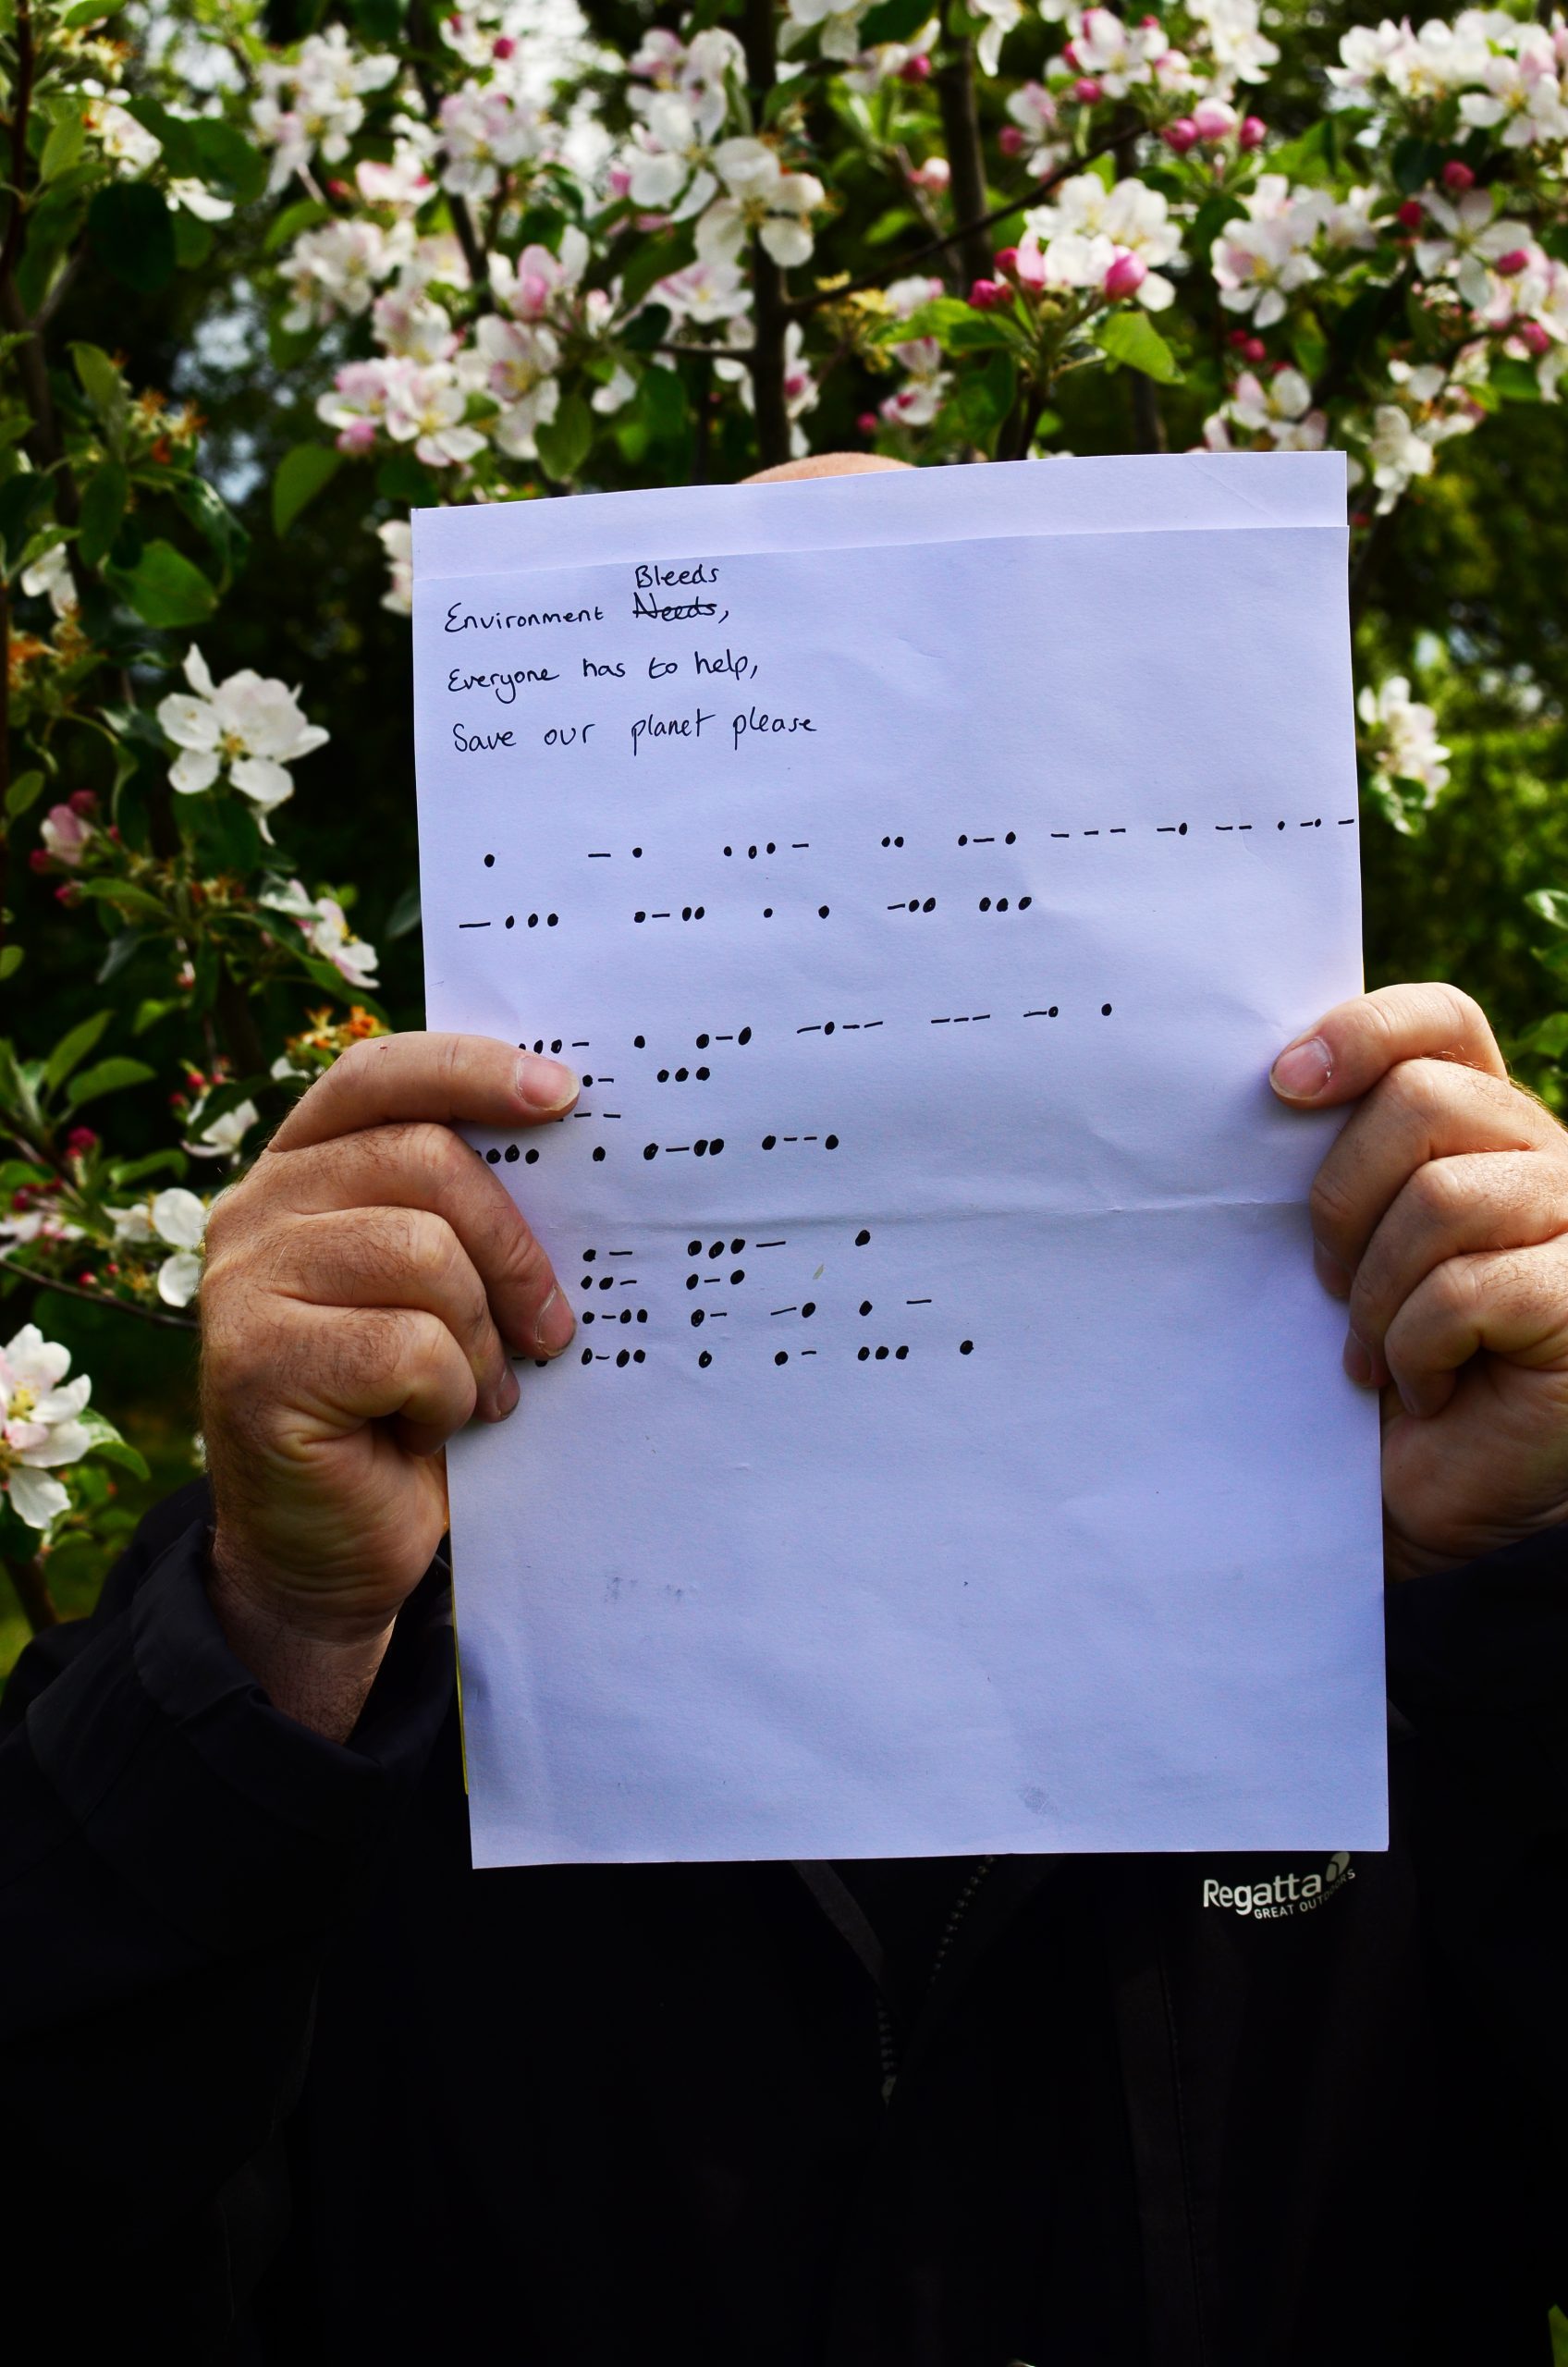 A poem written on a piece of paper, reads: "Environment bleeds (needs crossed out), Everyone has to help), Save our planet please". Followed by Morse Code